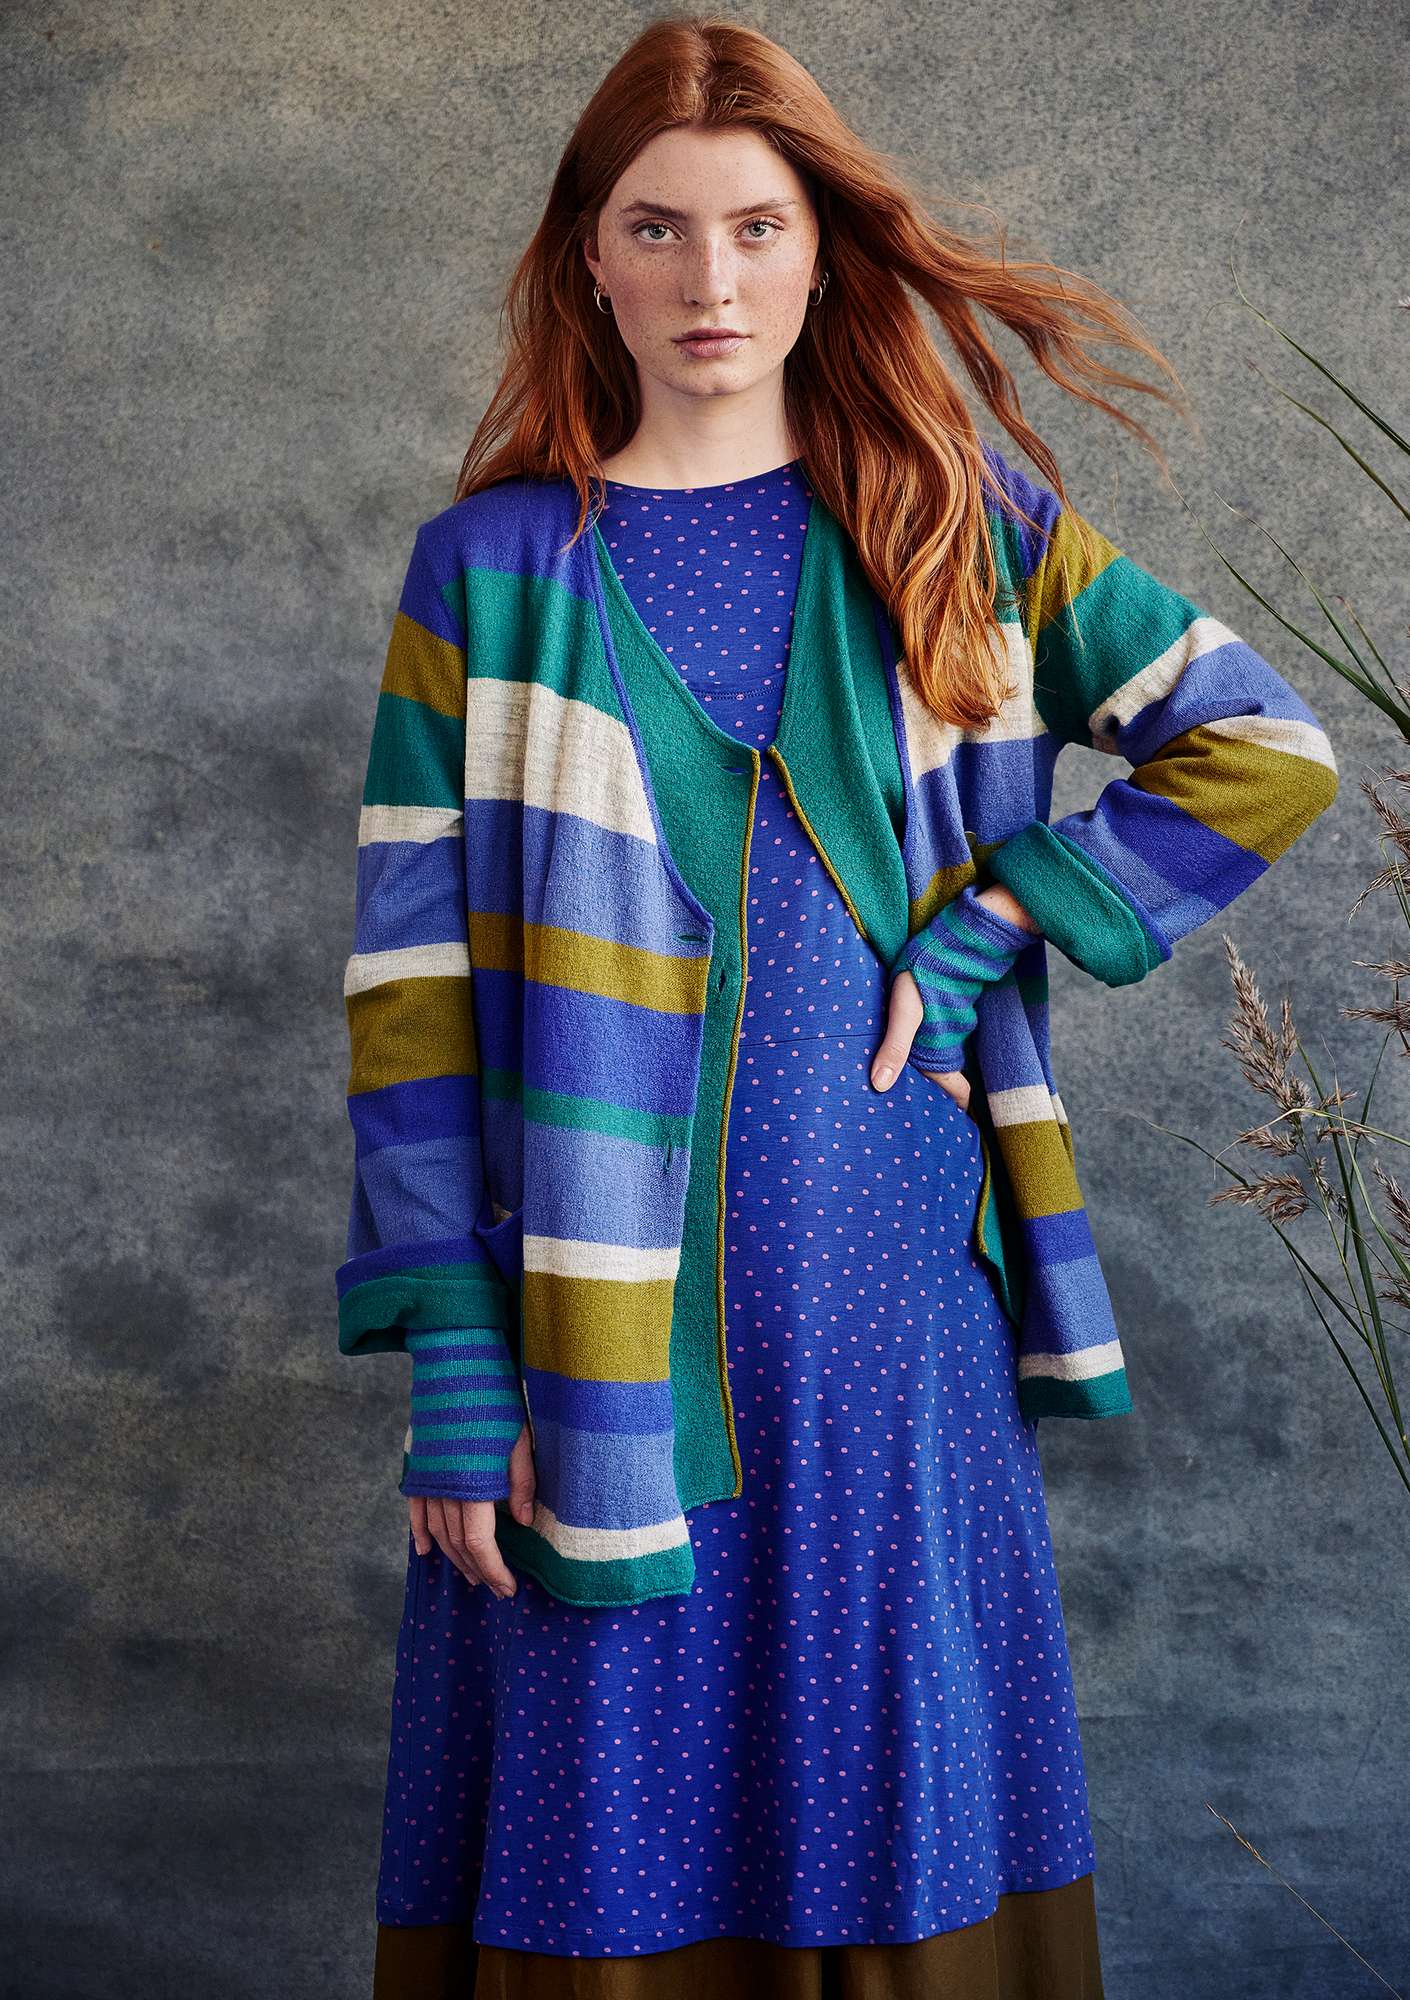 Solid-colour and striped wraparound cardigan crafted from felted wool cobalt blue/patterned thumbnail